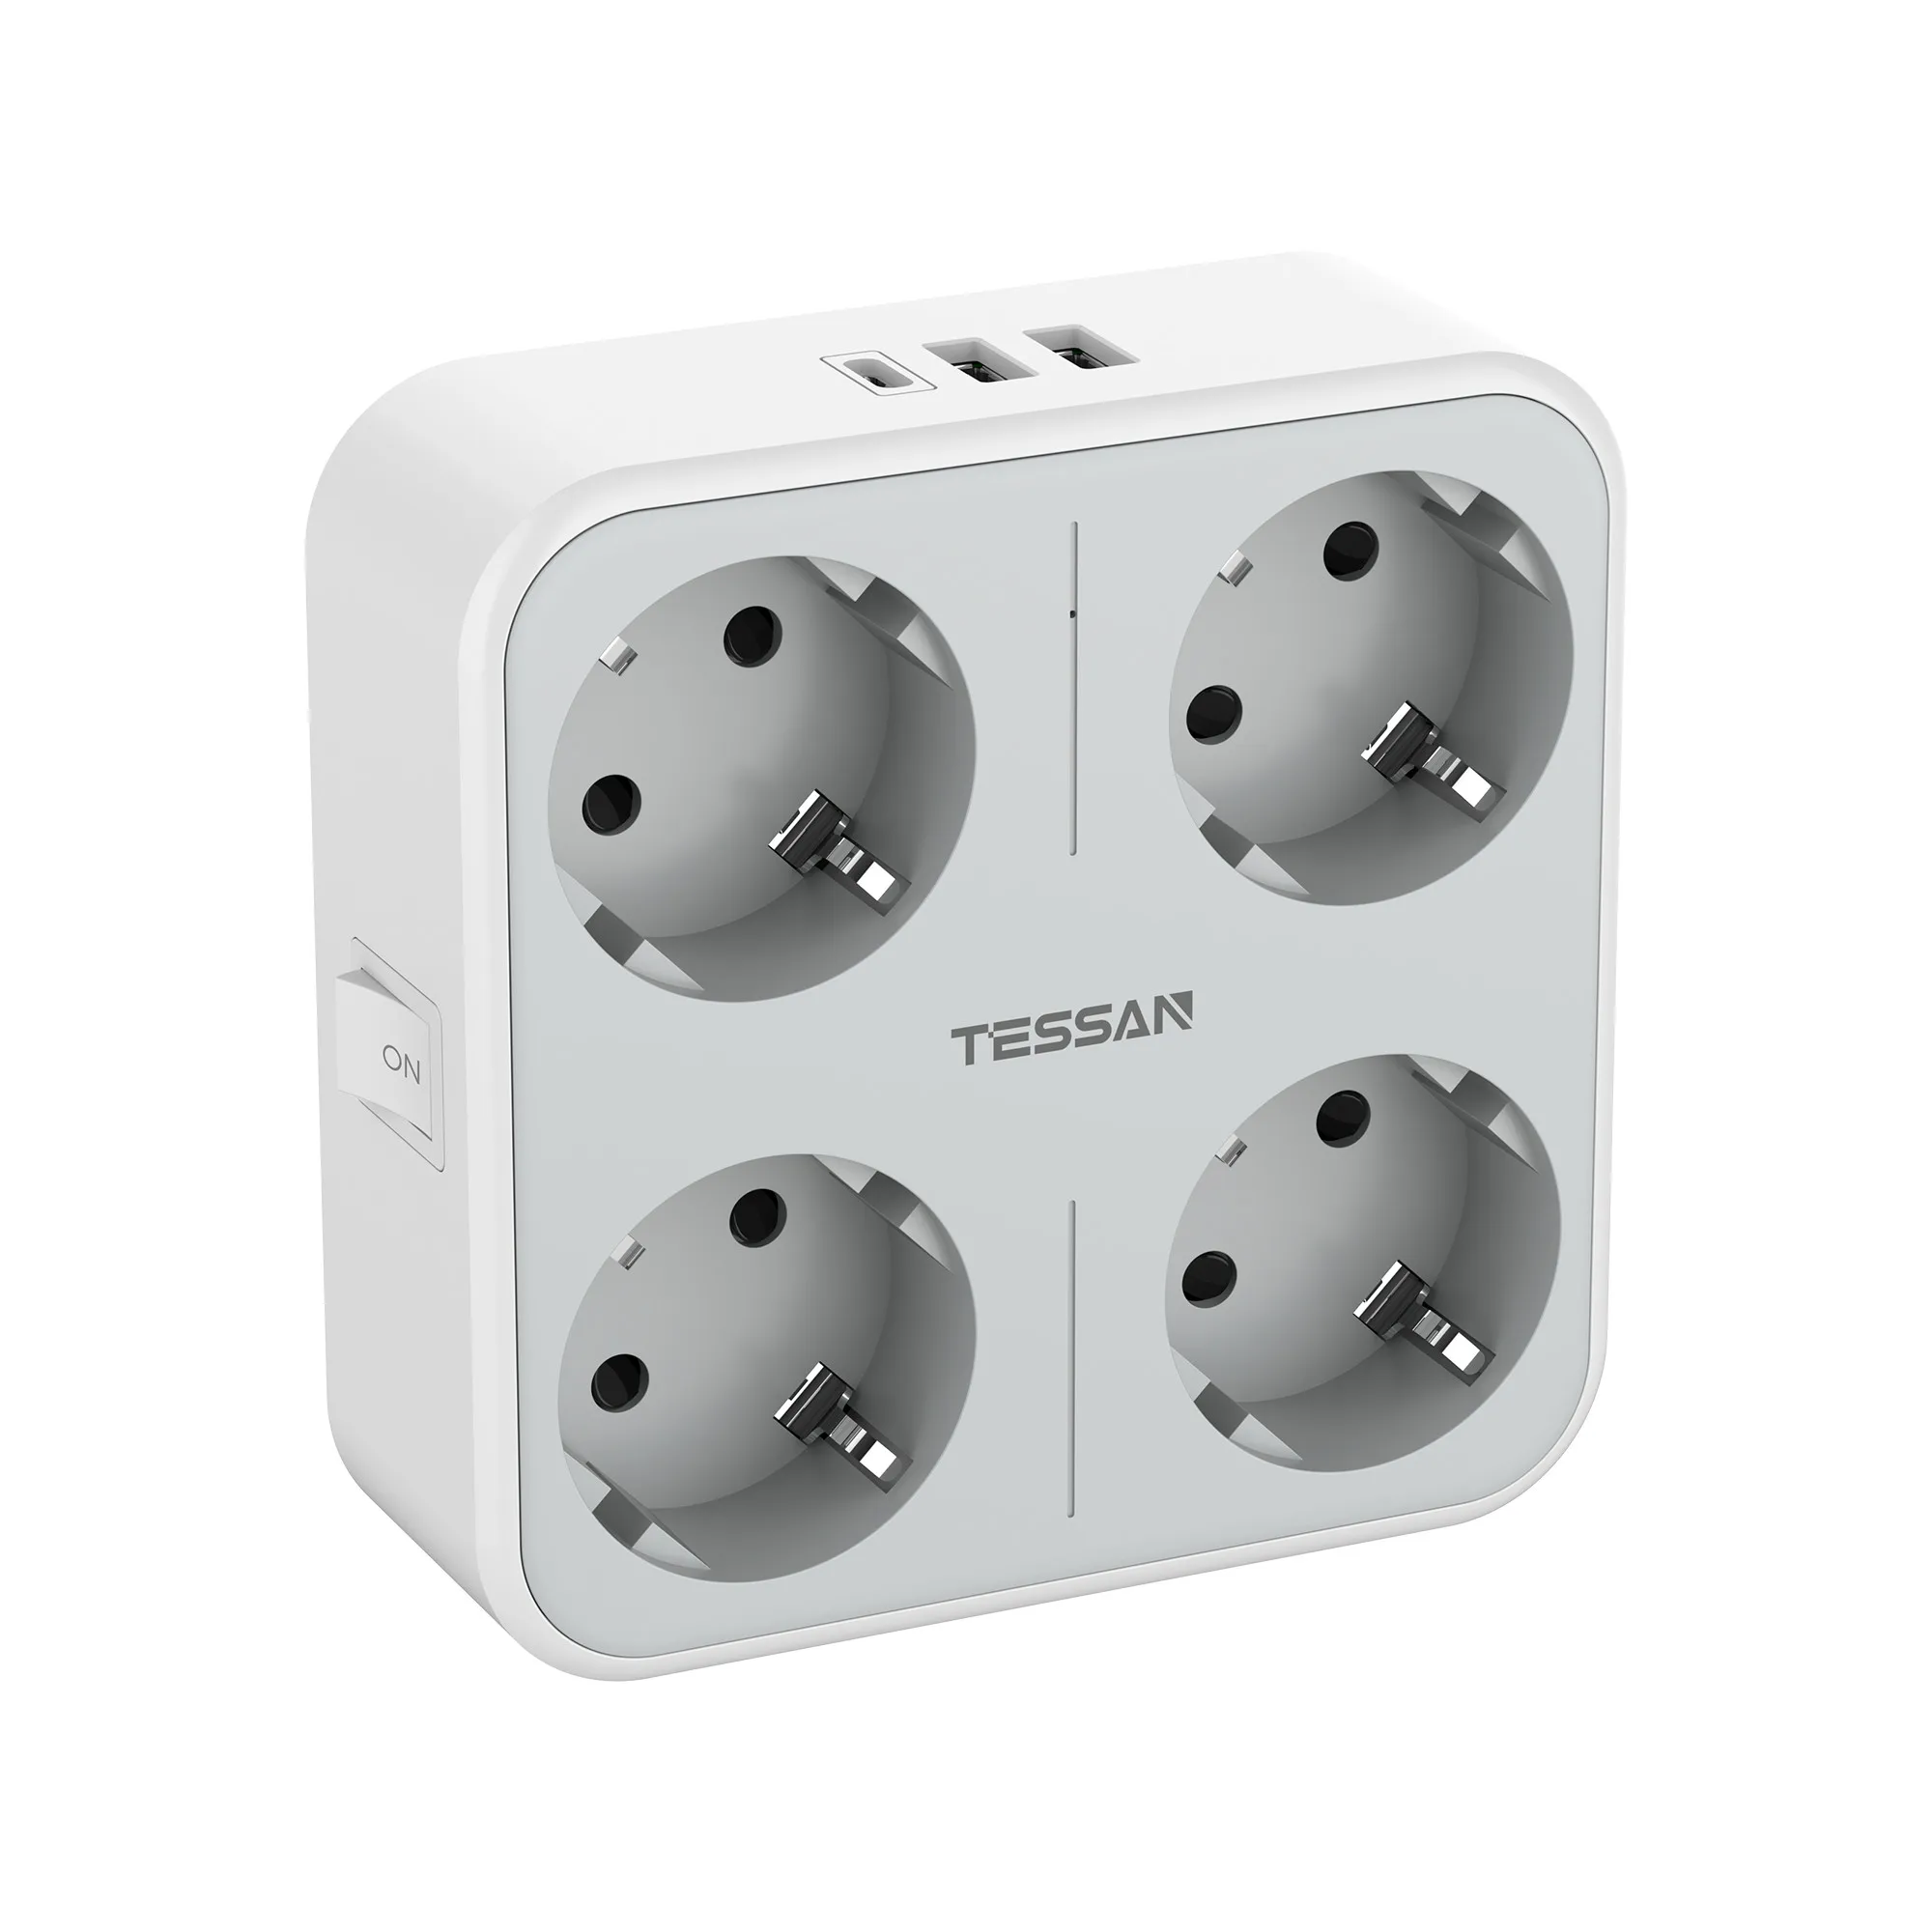 

TESSAN Multi Outlets Wall Socket Extender with AC Outlets, USB Ports and Type C, EU KR Plug Power Strip Adapter Charger for Home